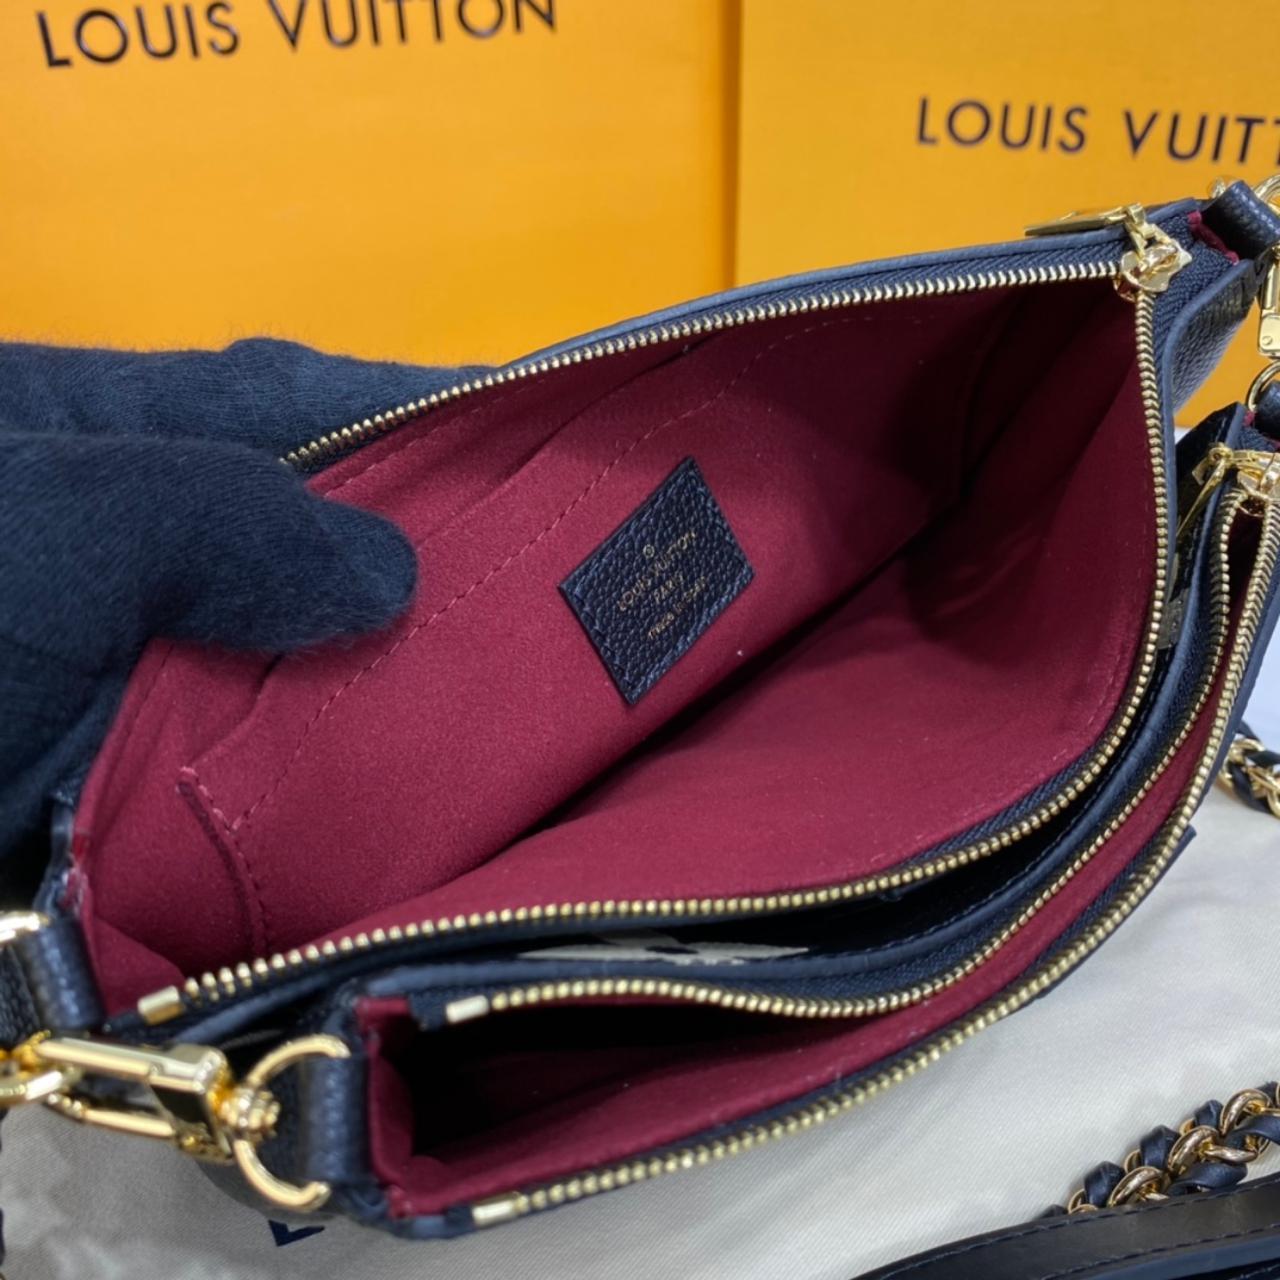 Louis Vuitton Pochette MM44813 brand new with tags - Depop